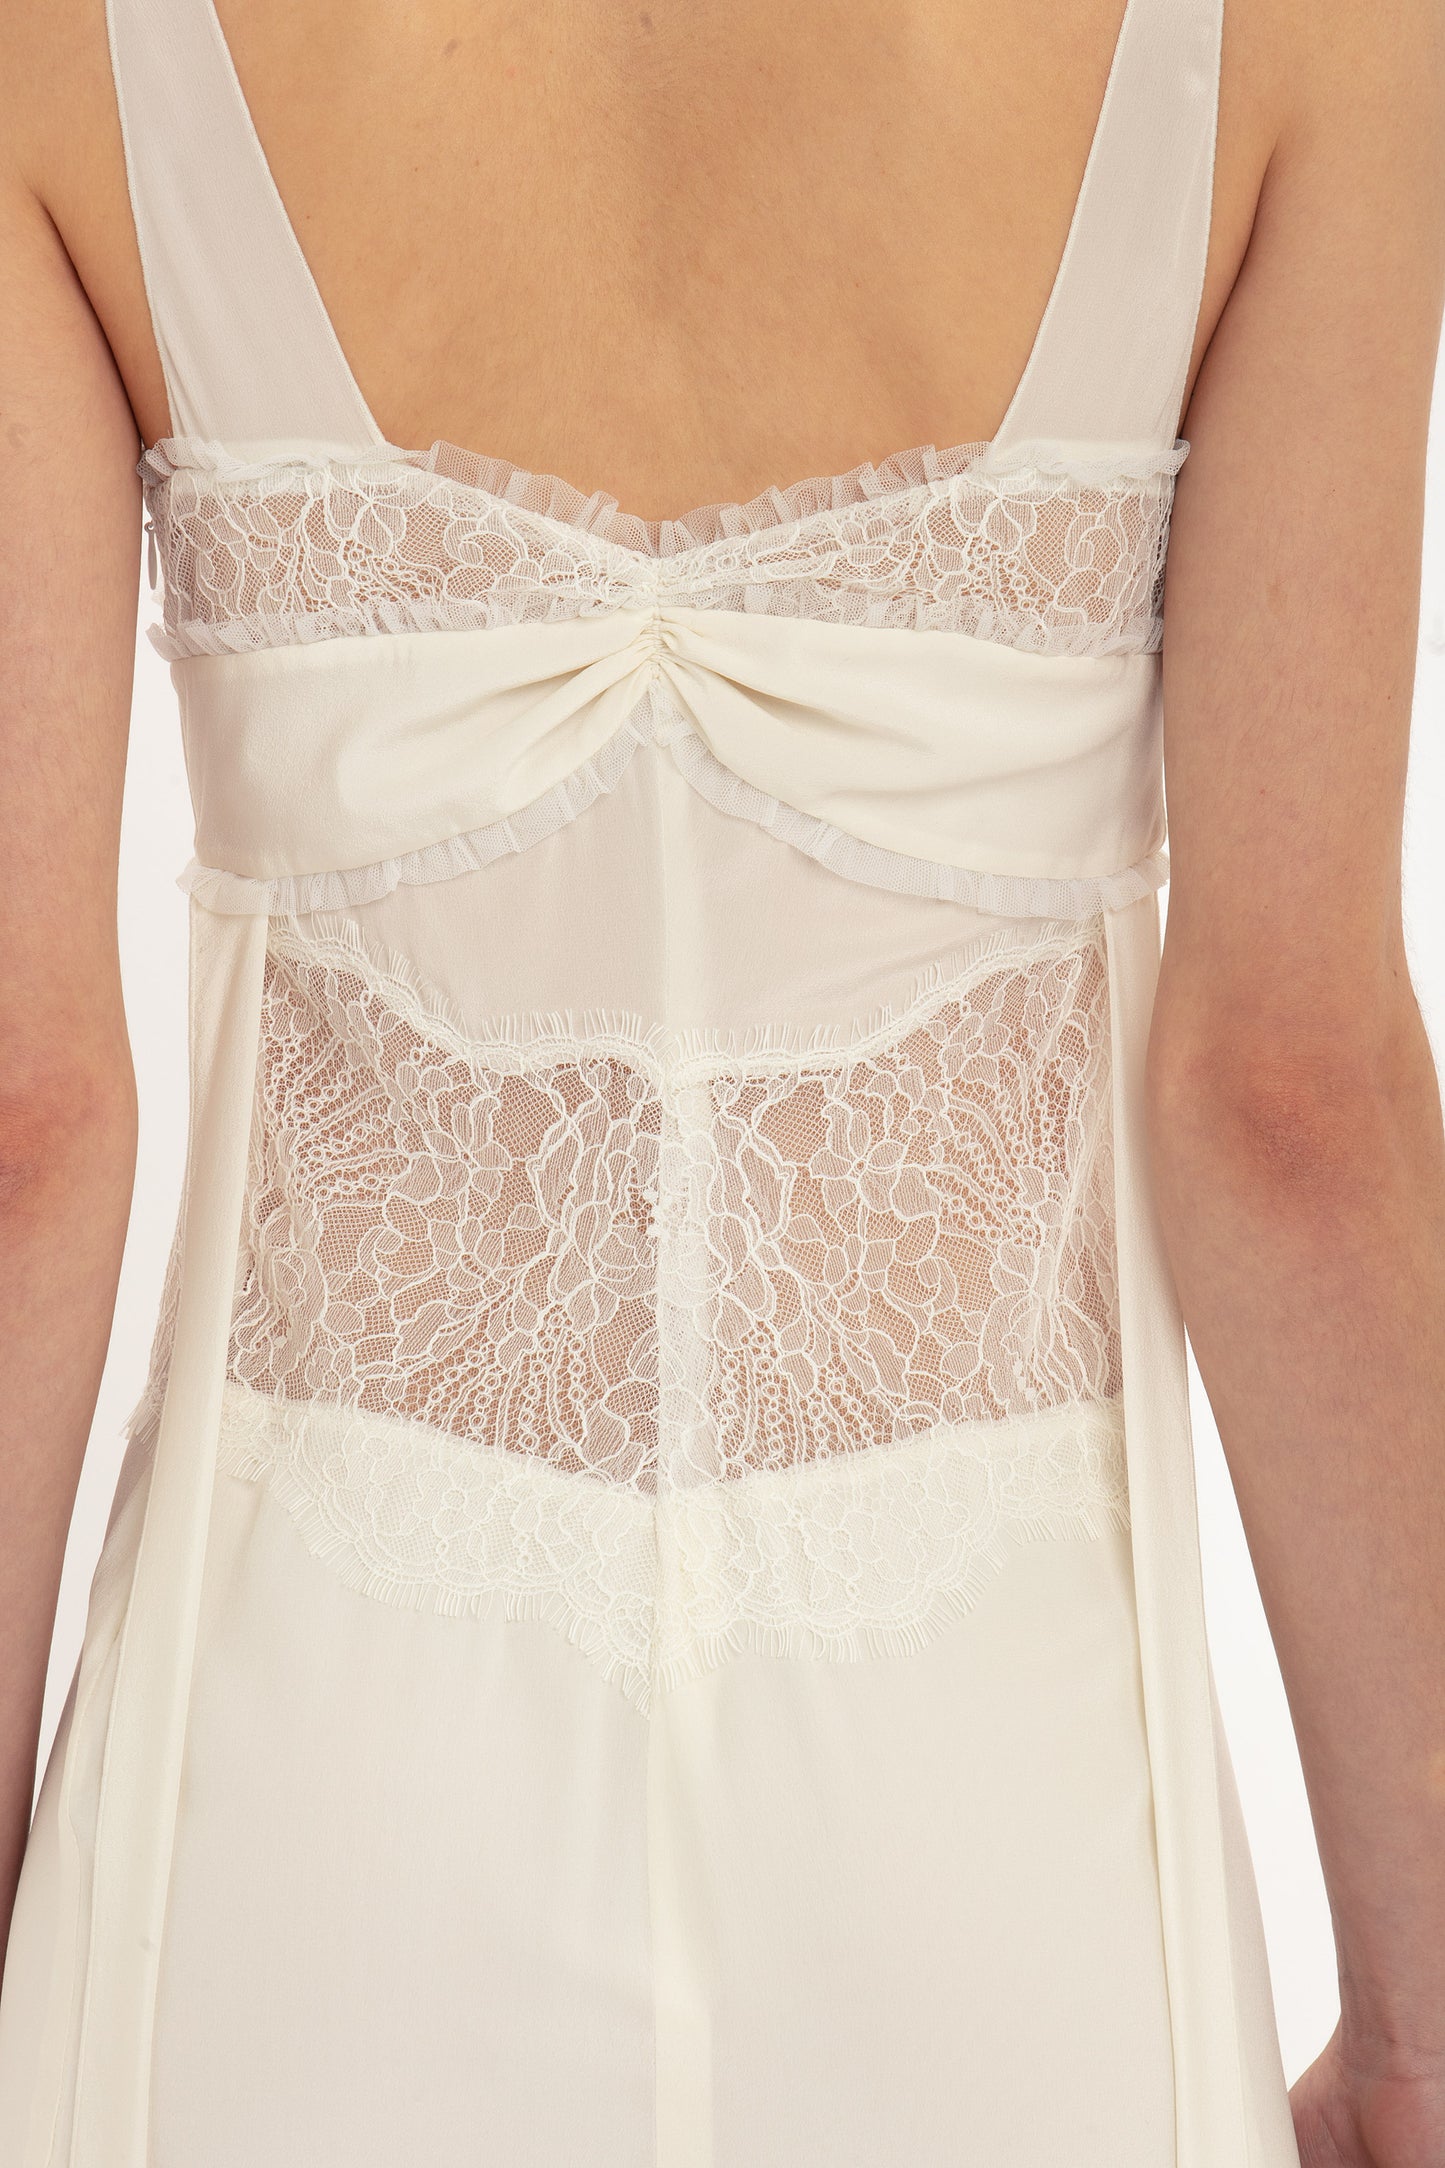 Back view of a person wearing the Victoria Beckham Ruffle Detail Midi Dress In Ivory, adorned with tactile lace and a decorative bow on the upper back.